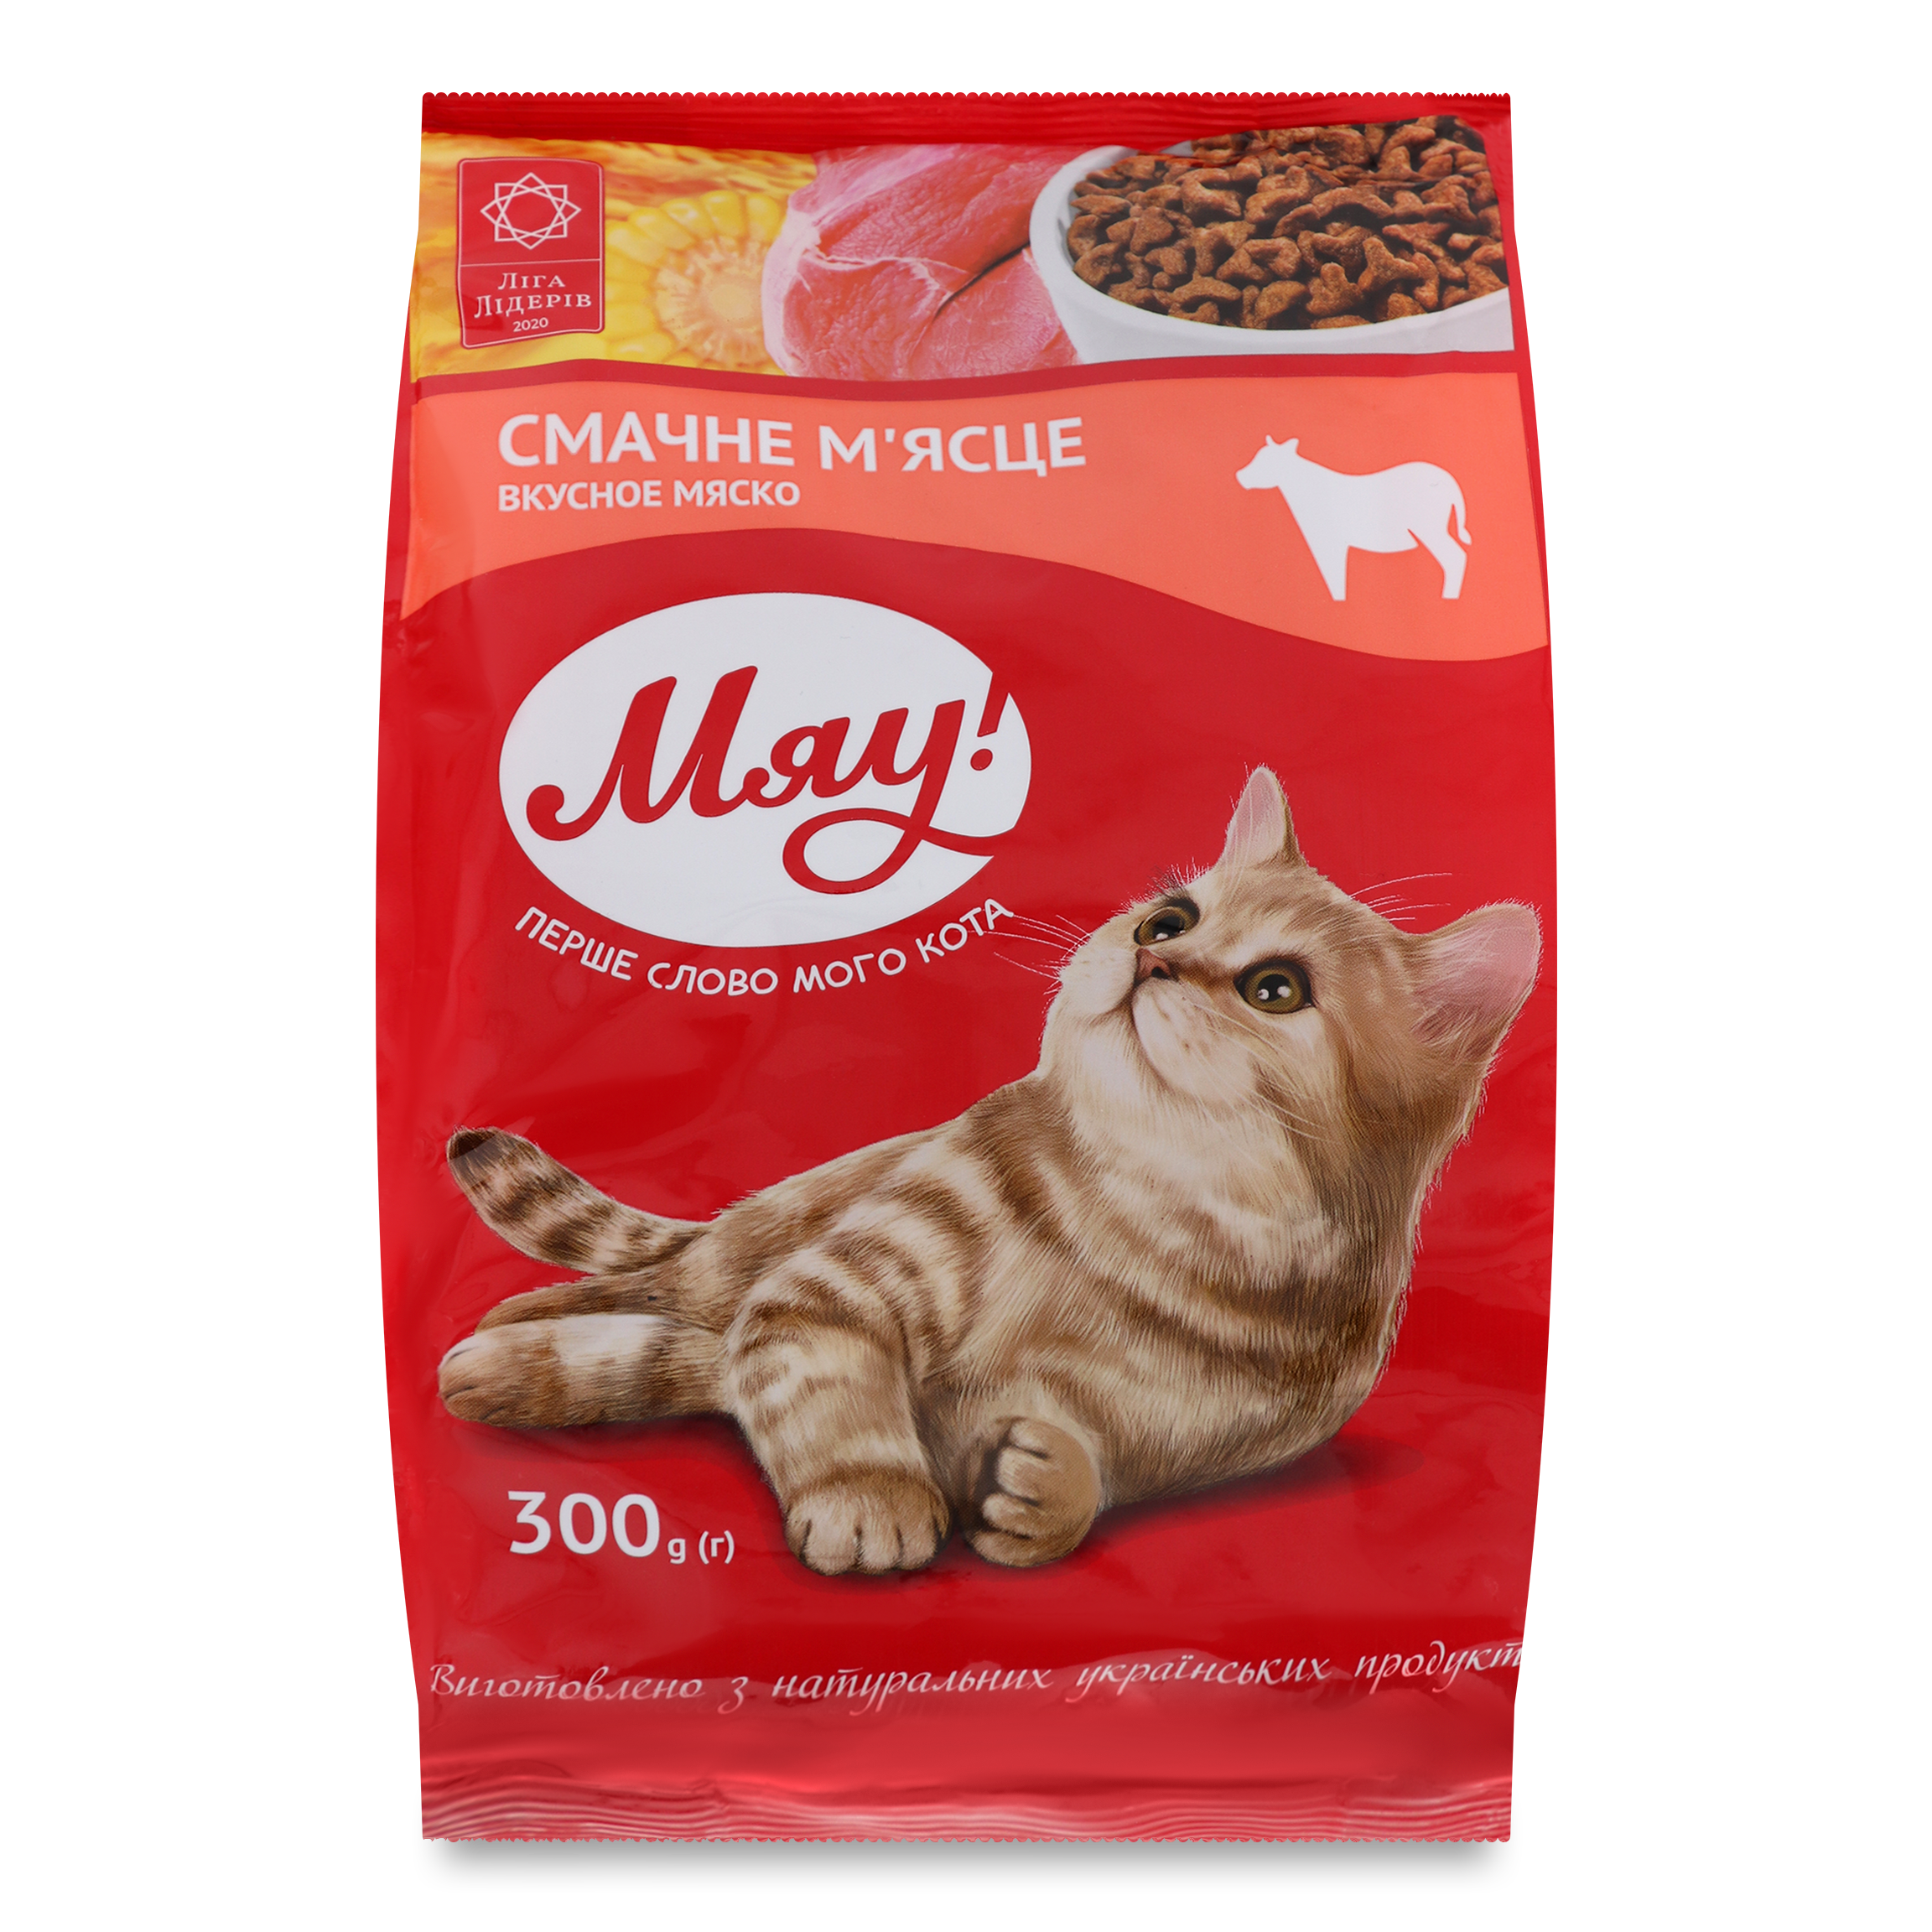 Meow! Meat Cat's Food 300g